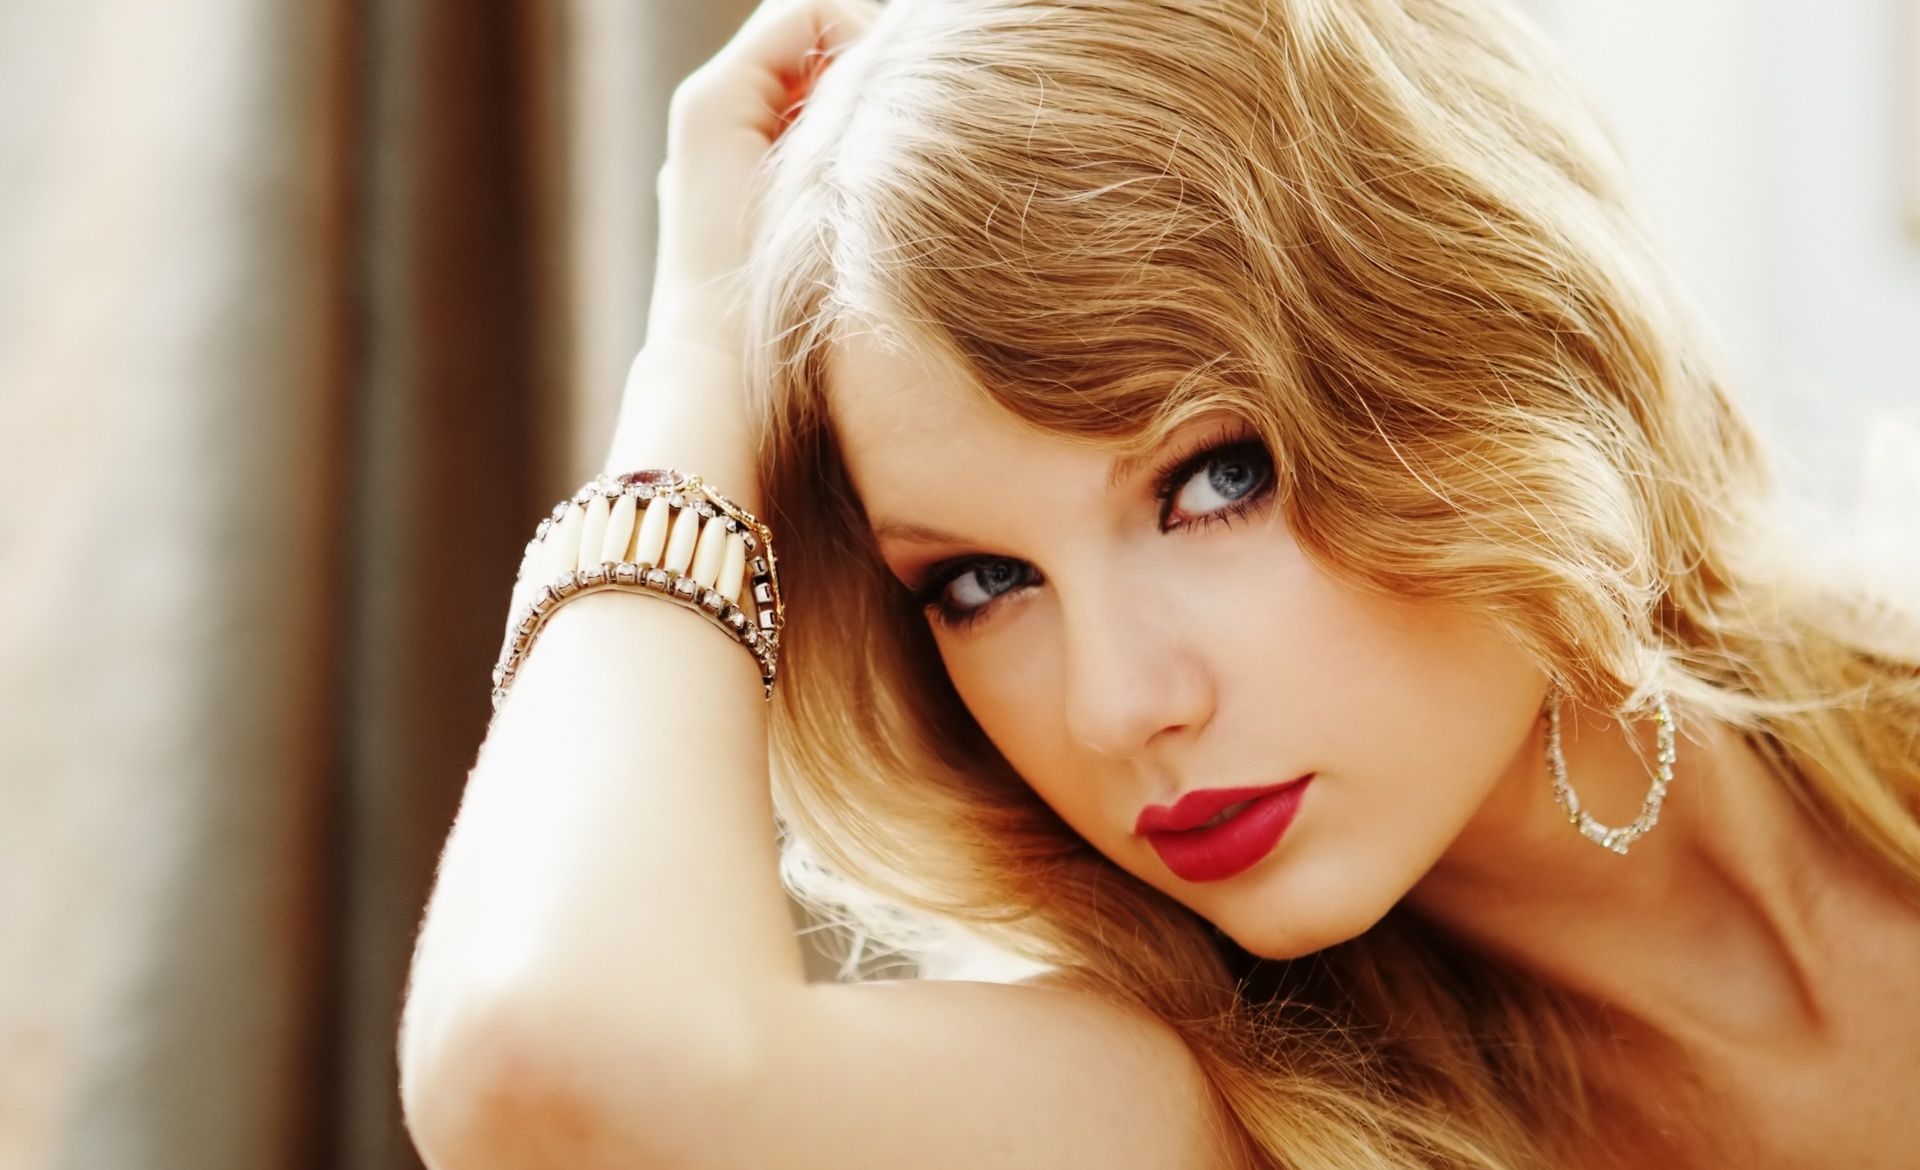 Taylor swift hd wallpaper download taylor swift images